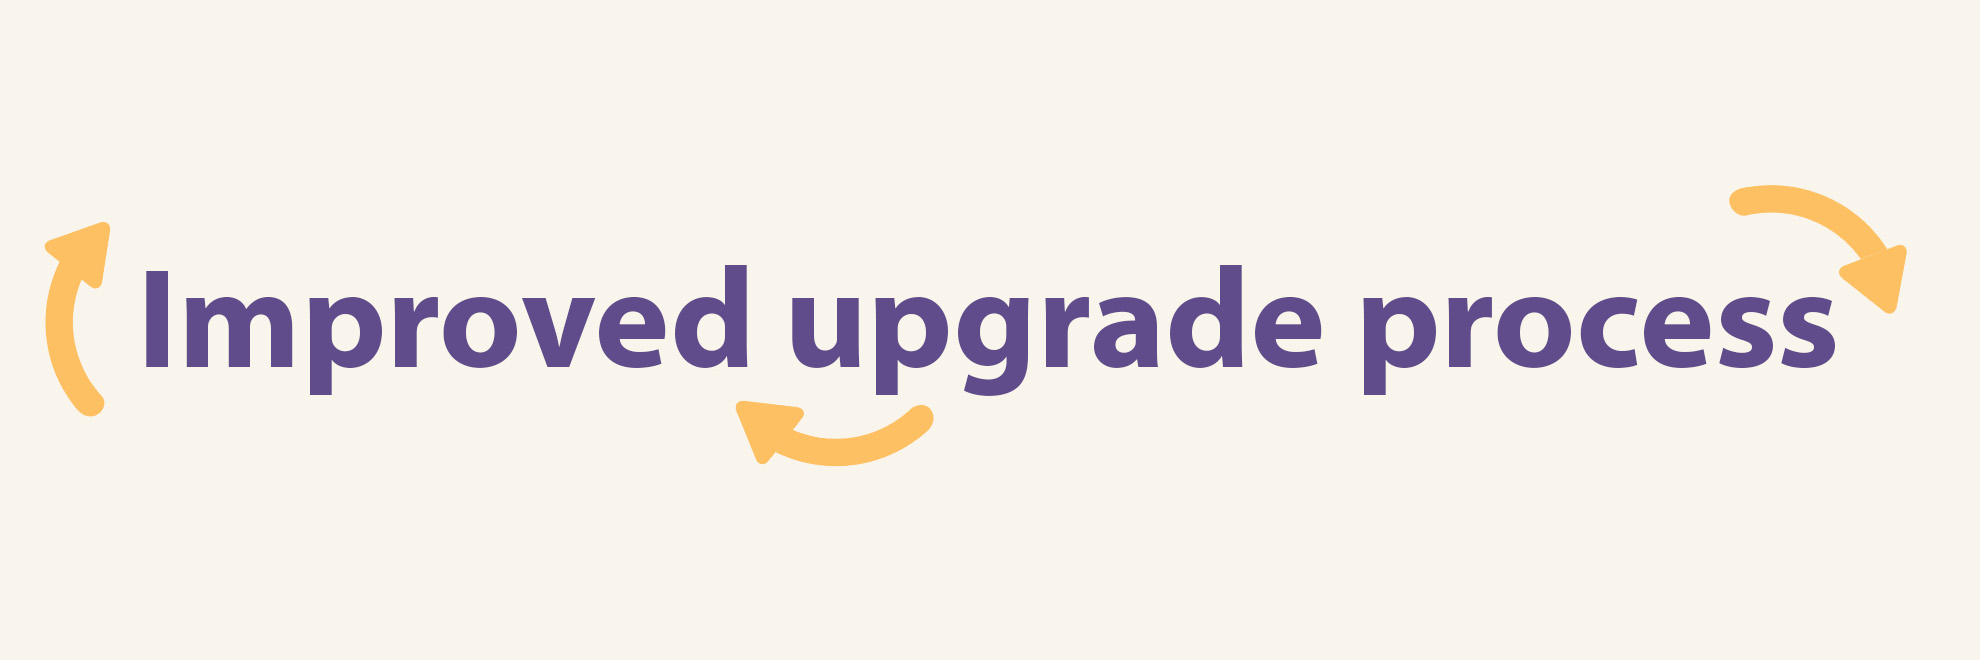 Illustration showing Improved upgrade process and some decorative arrows.